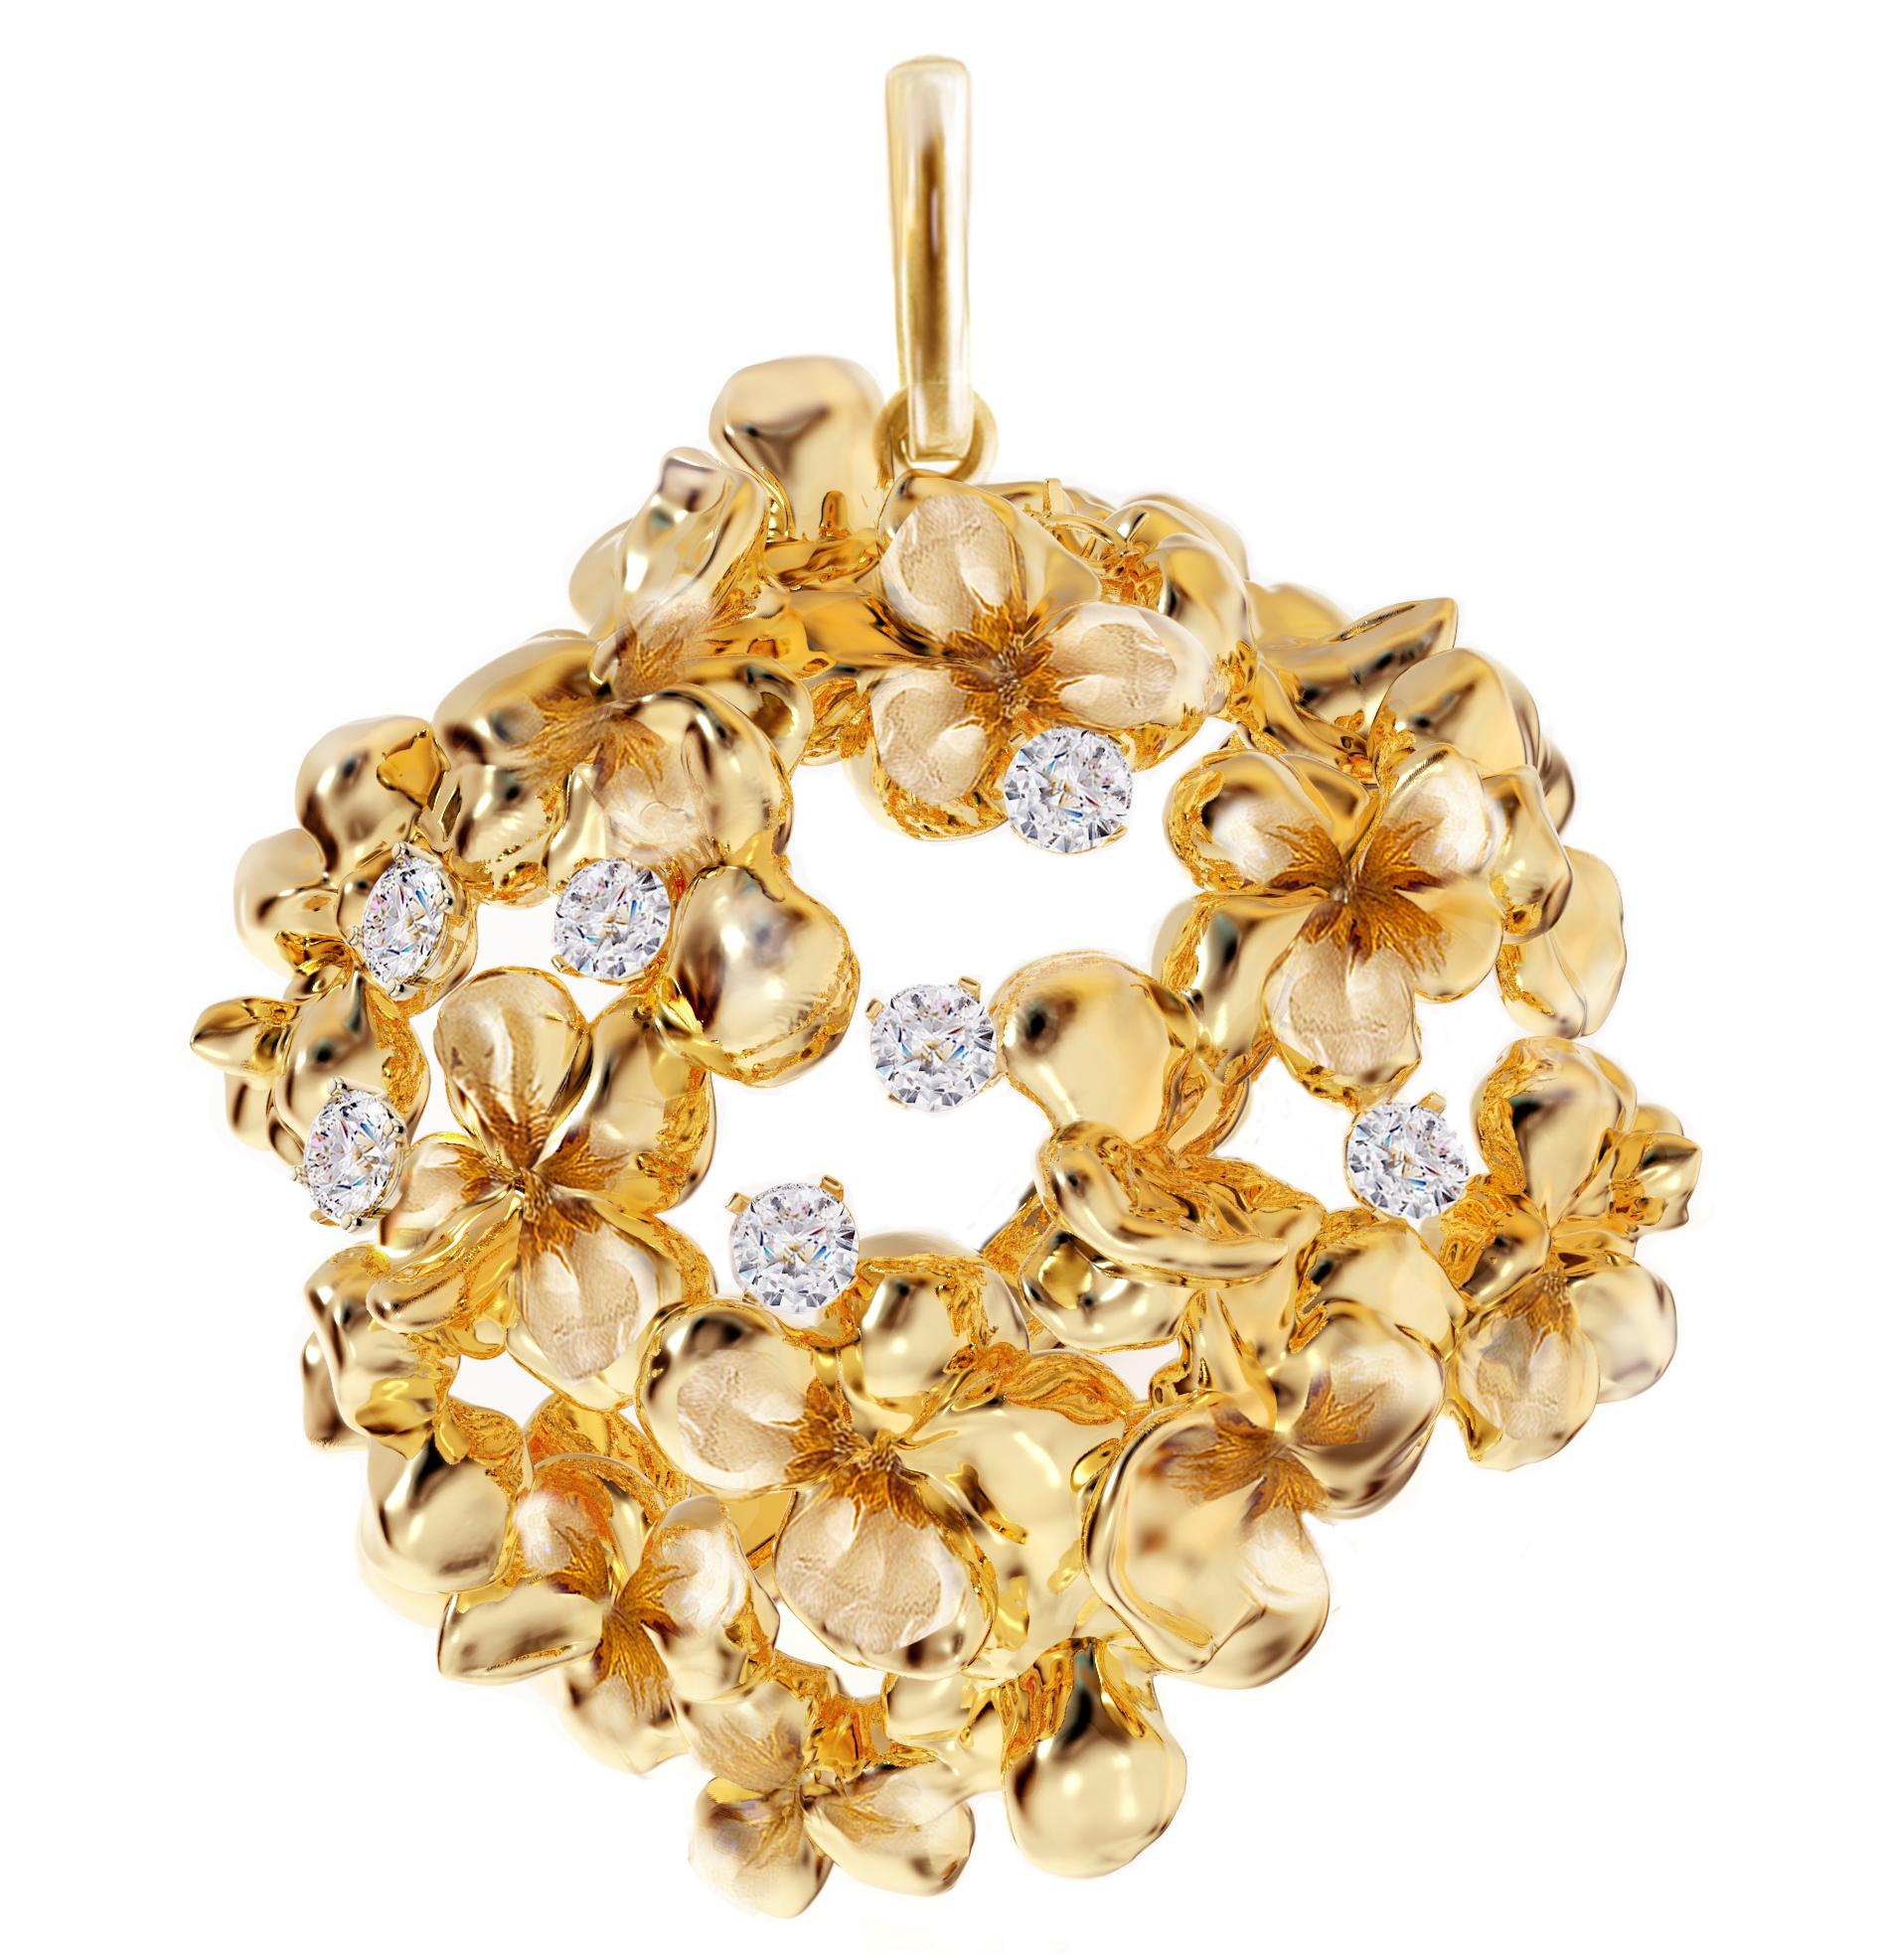 This Hortensia contemporary pendant necklace is made of 18 karat yellow gold and features 7 round natural diamonds (VS, F-G) as well as a detachable untreated natural sapphire, heart cut, 6.08 carats, measuring 0.48x0.37 inches / 12.2x9.5 mm. The